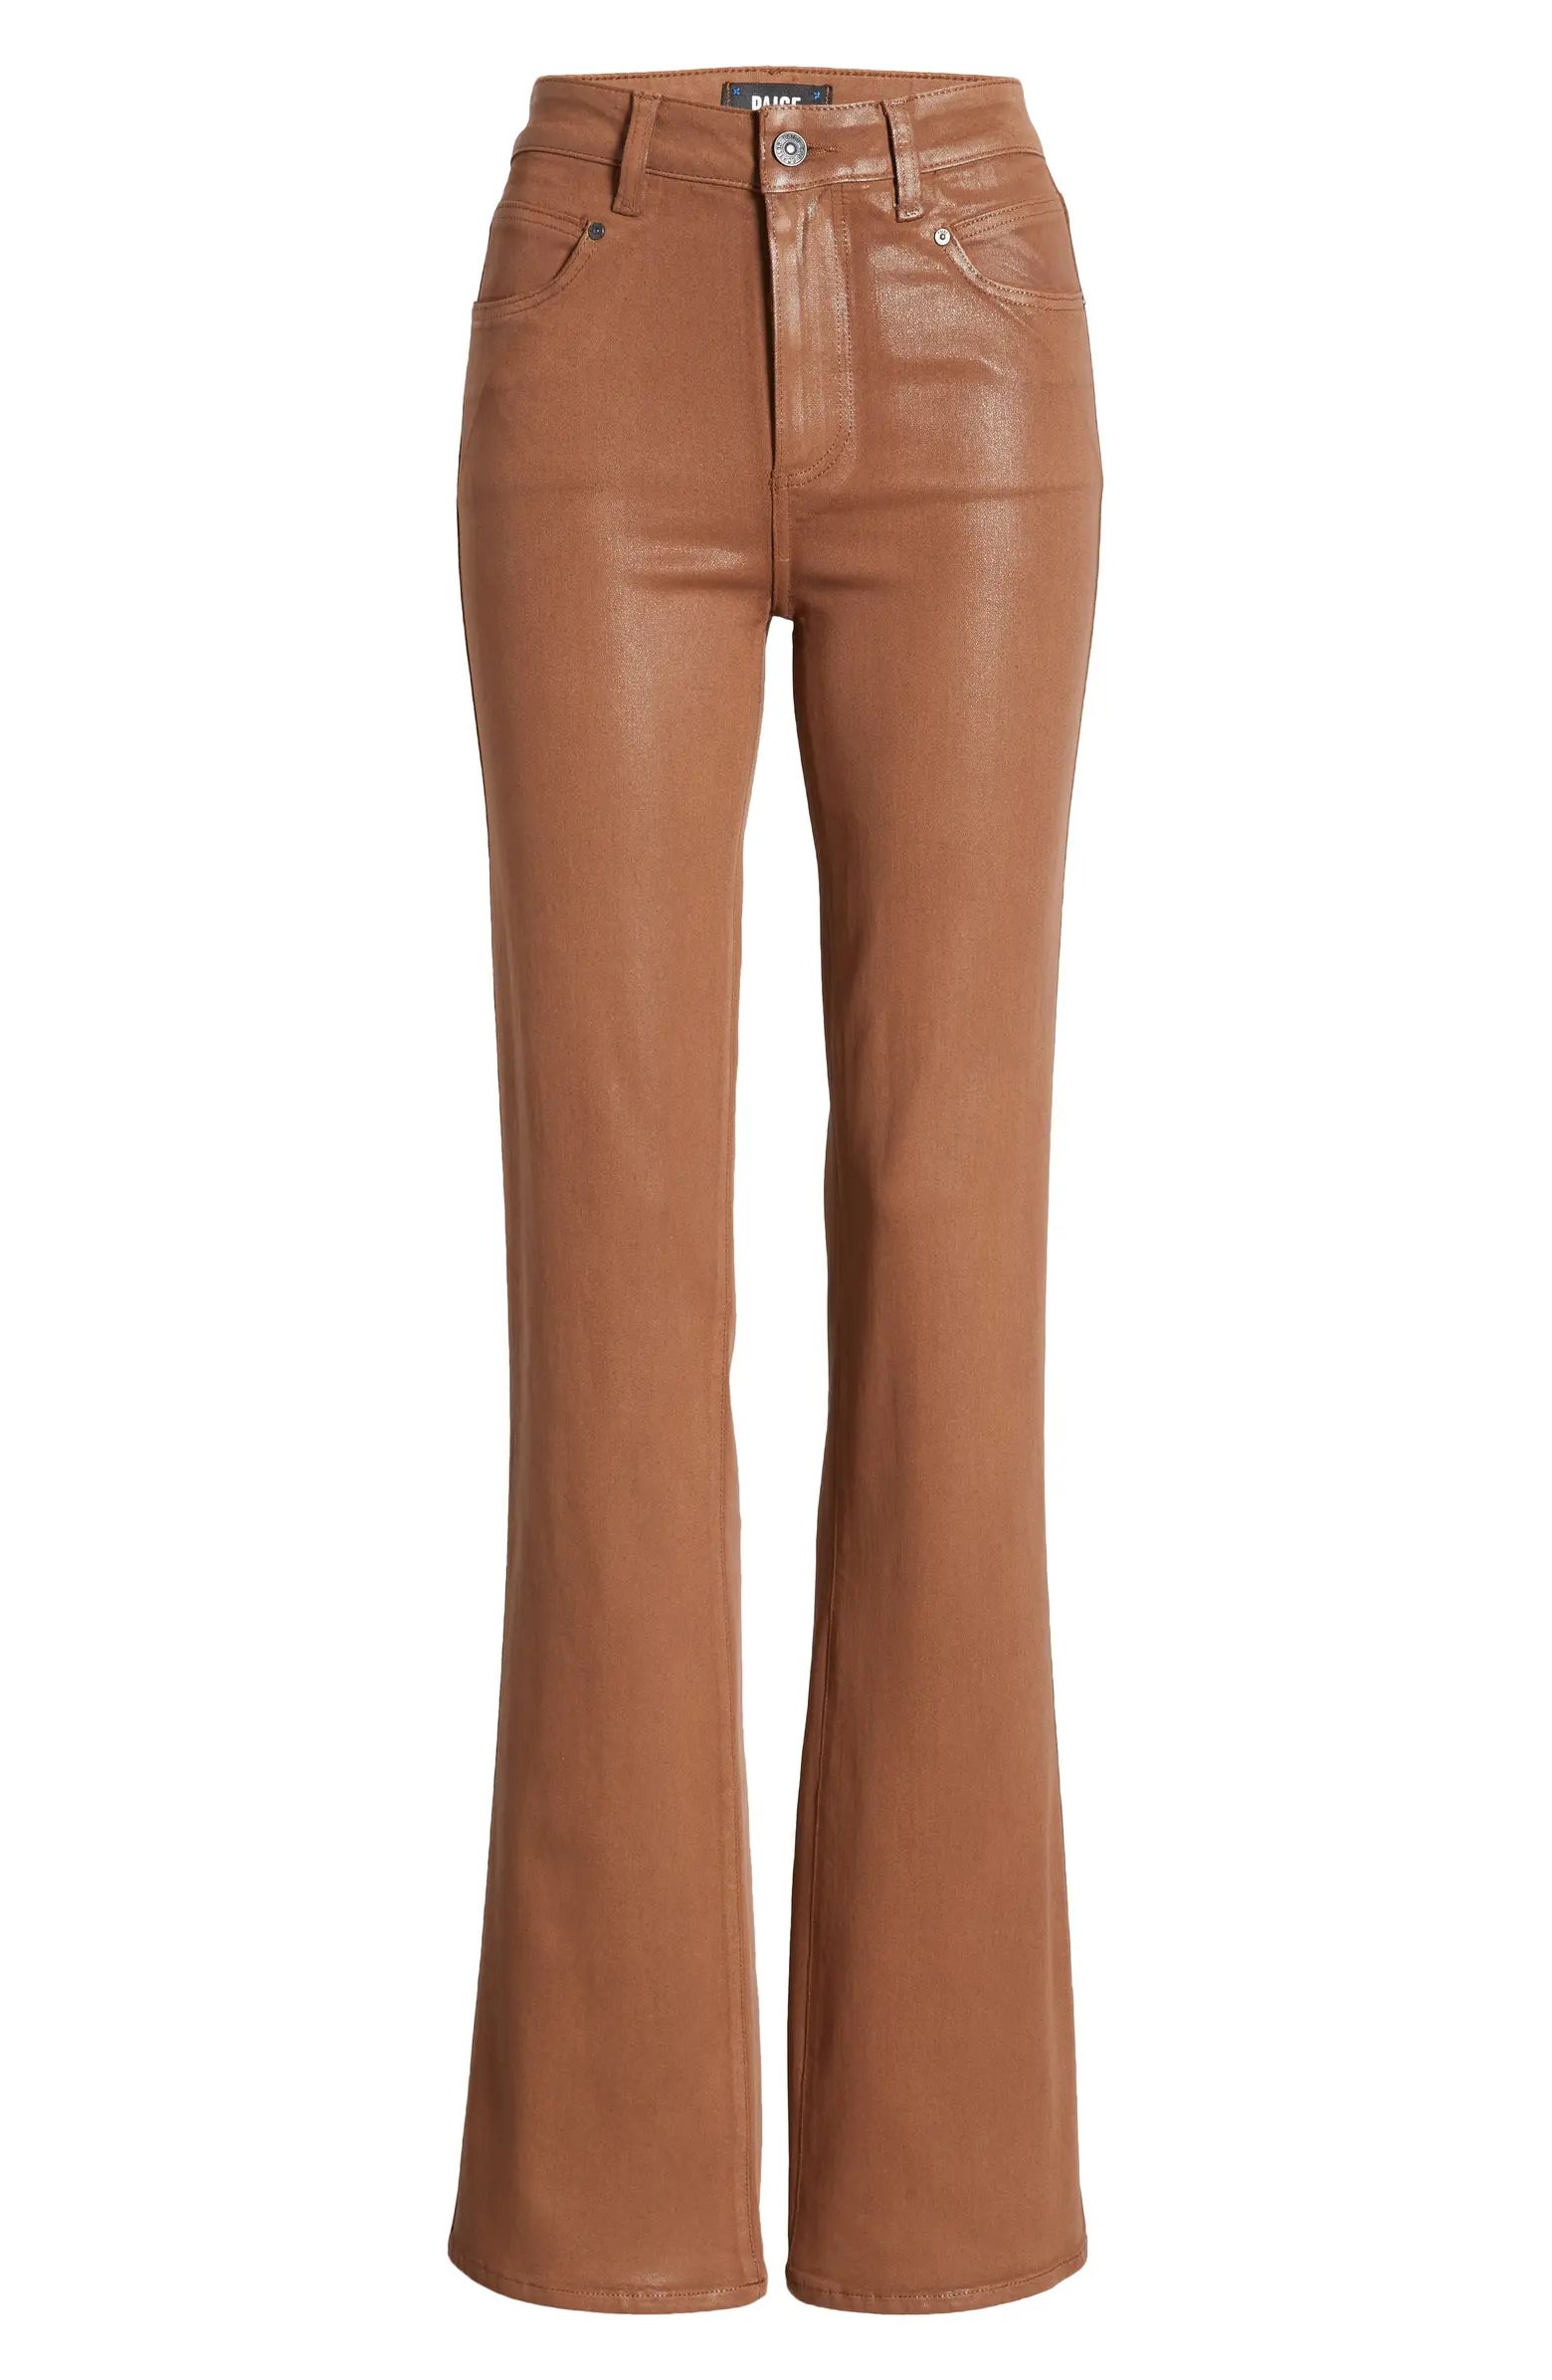 Laurel Canyon Coated High Waist Flare Jeans | Nordstrom